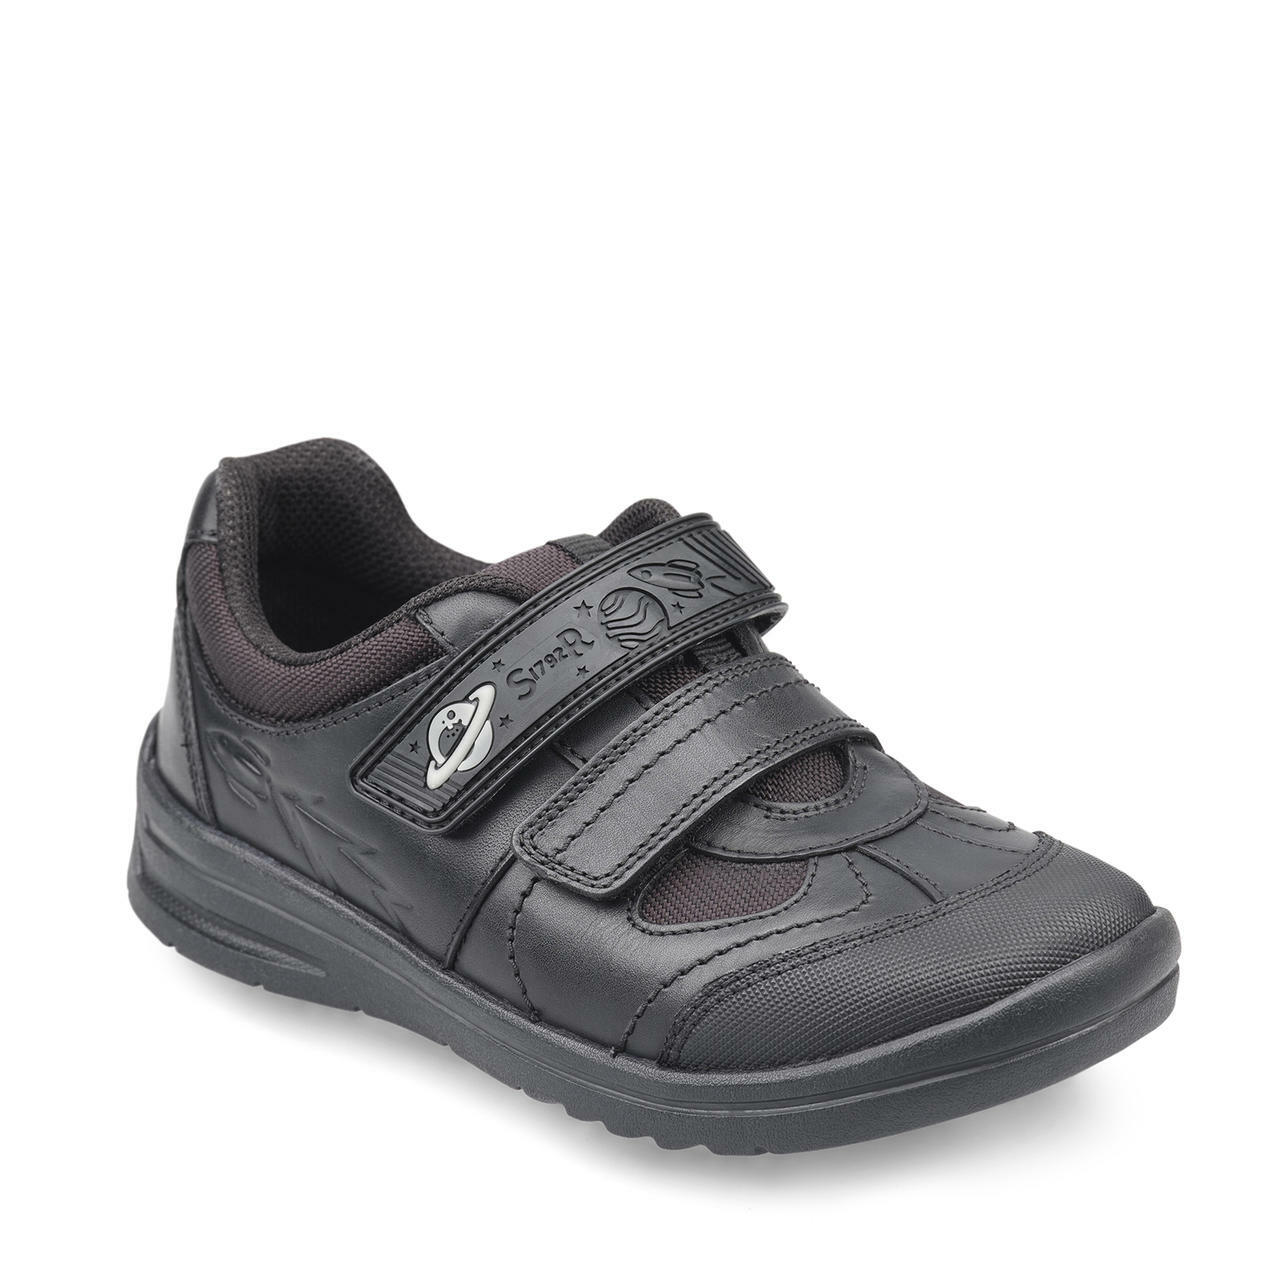 A boys school shoe by Start Rite,style Rocket, in black leather with double velcro fastening. Angled  view.